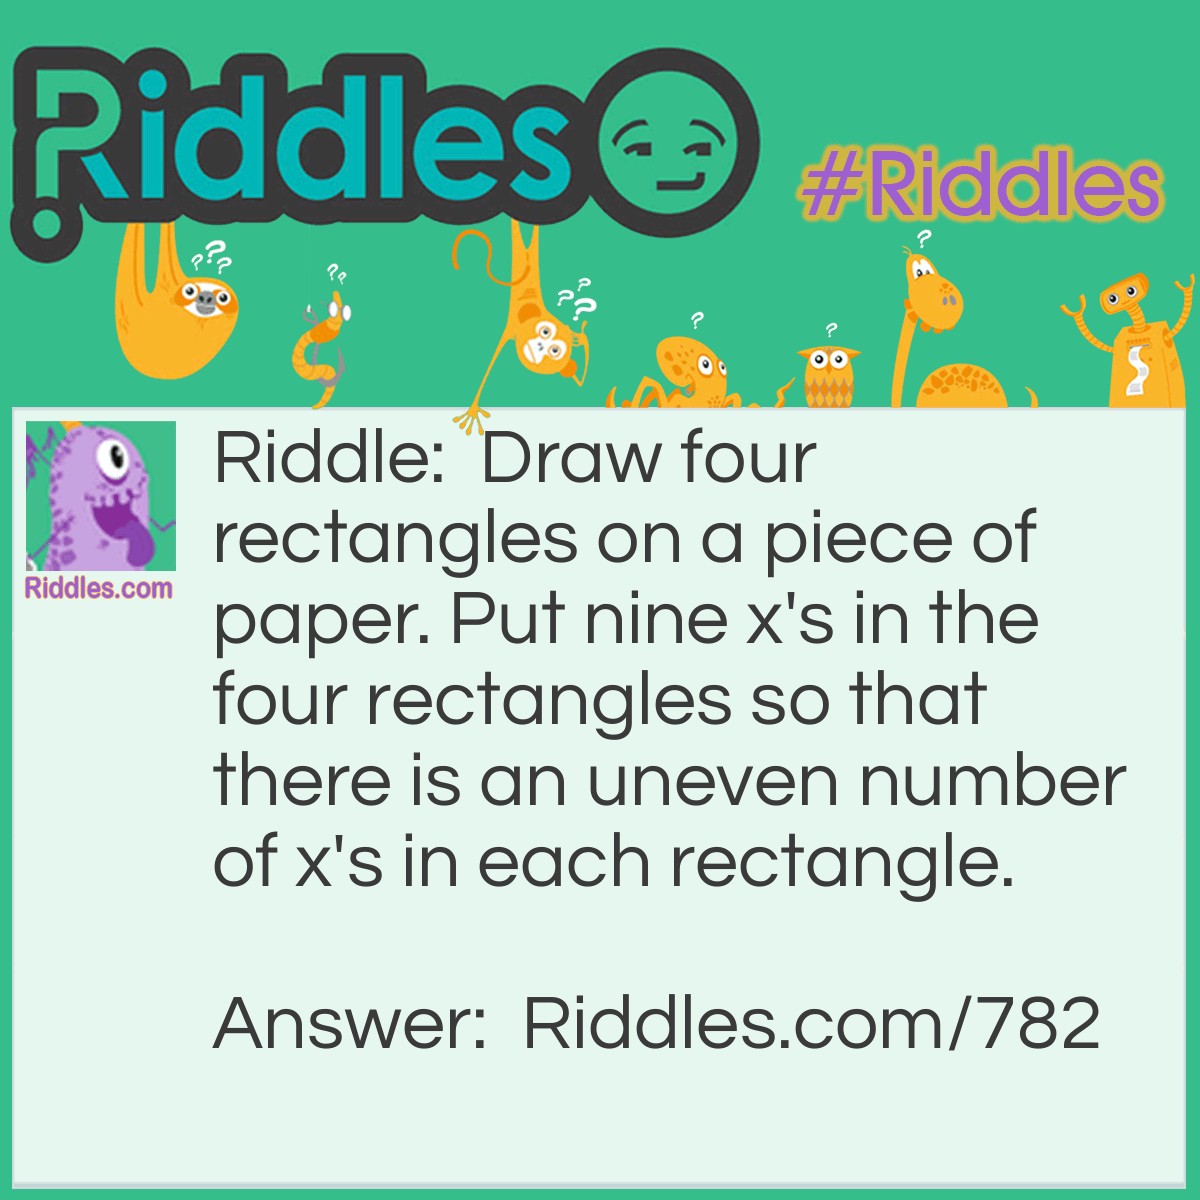 Riddle: Draw four rectangles on a piece of paper. Put nine x's in the four rectangles so that there is an uneven number of x's in each rectangle. Answer: Draw one large rectangle. Then draw the three smaller rectangles within the large rectangle. Place three x's in each small rectangle. There will be nine x's in the large rectangle.